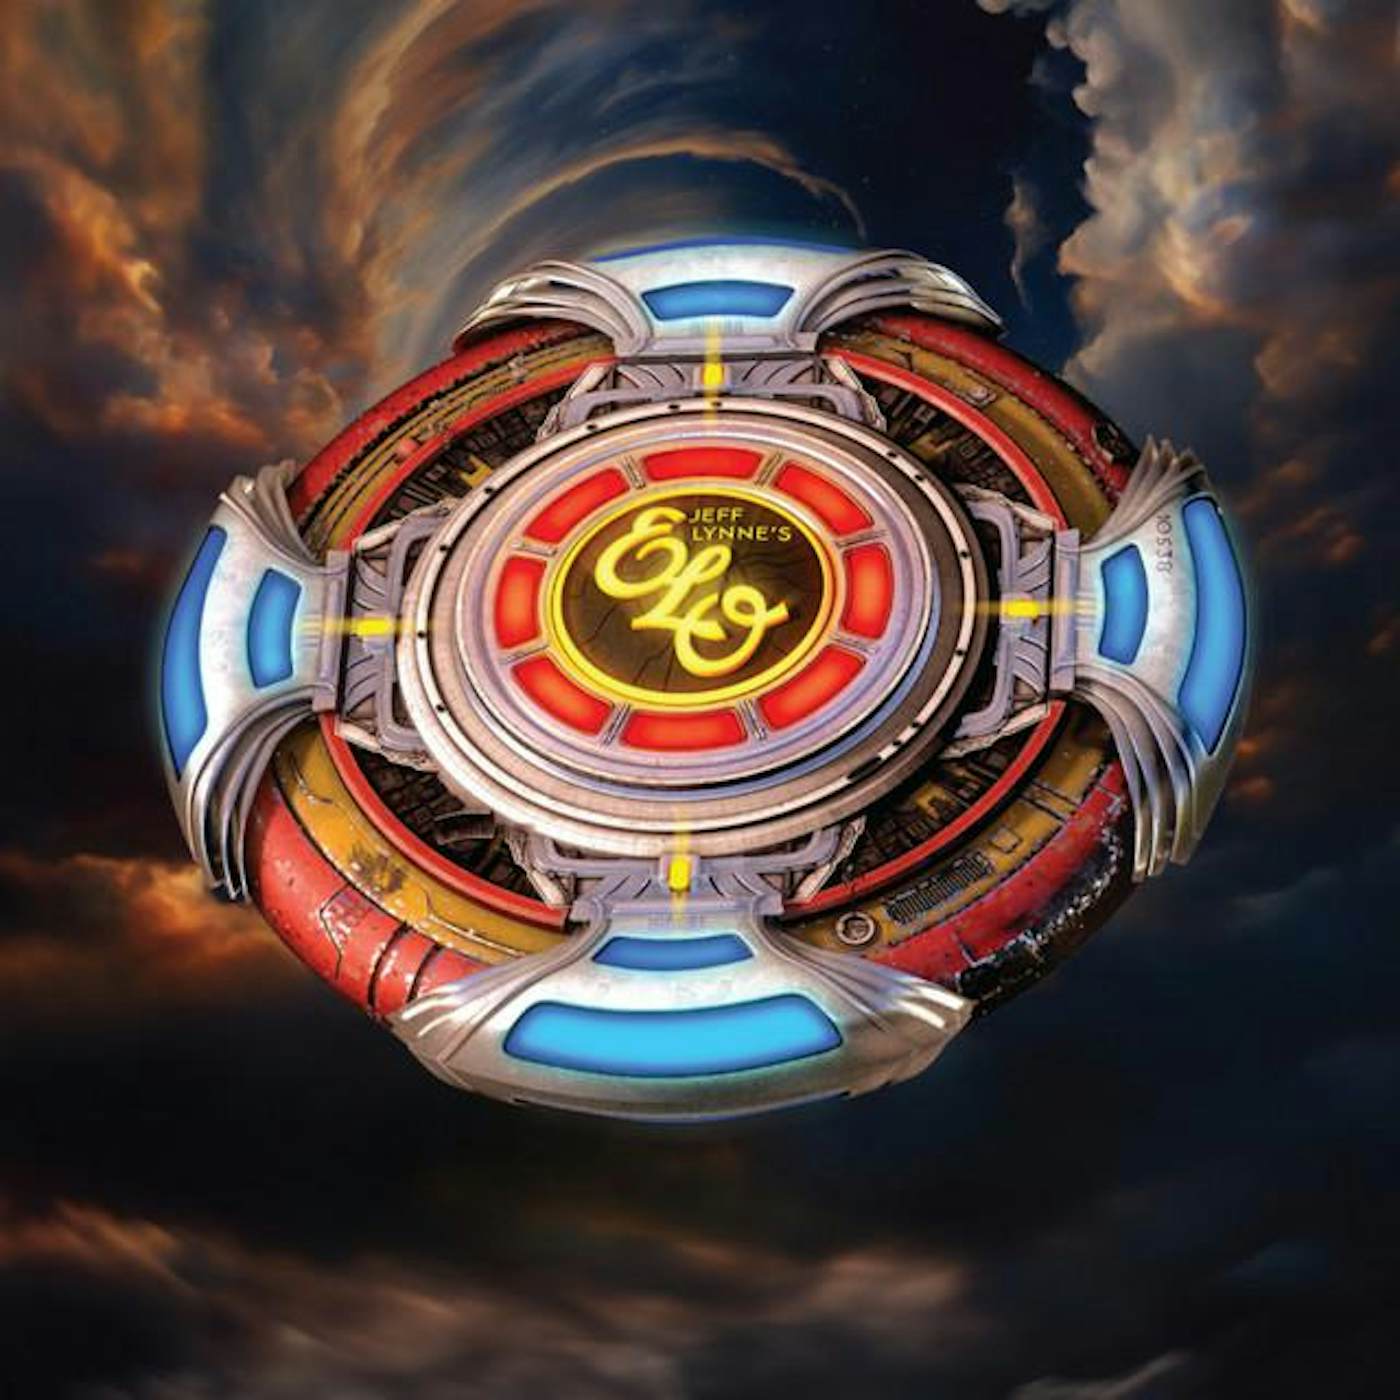 ELO (Electric Light Orchestra)